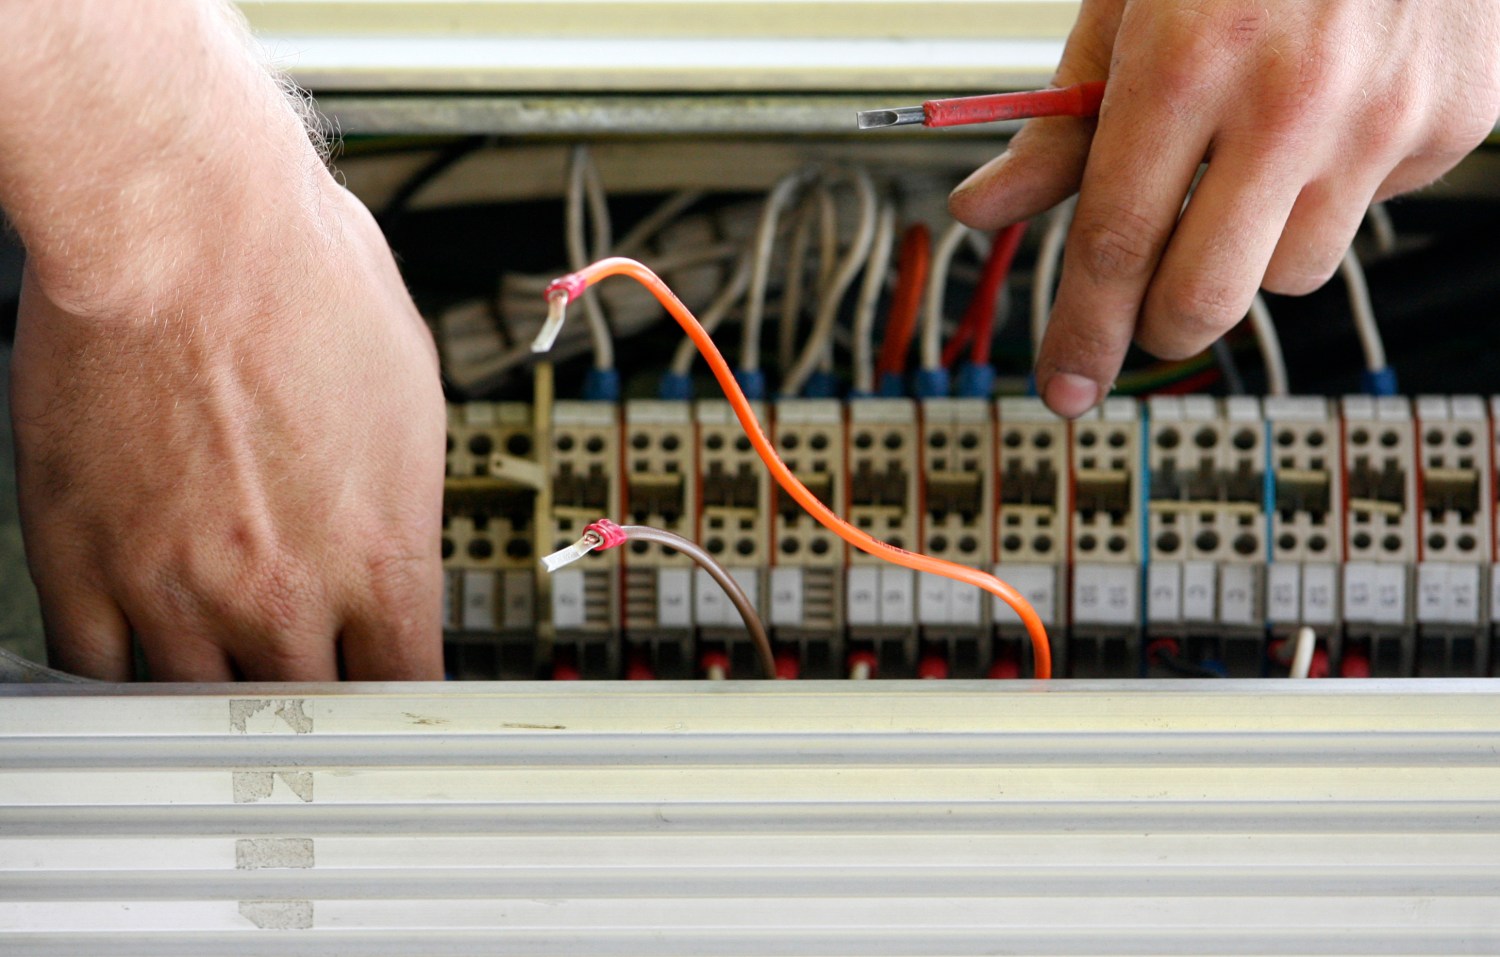 A technician works on network cables